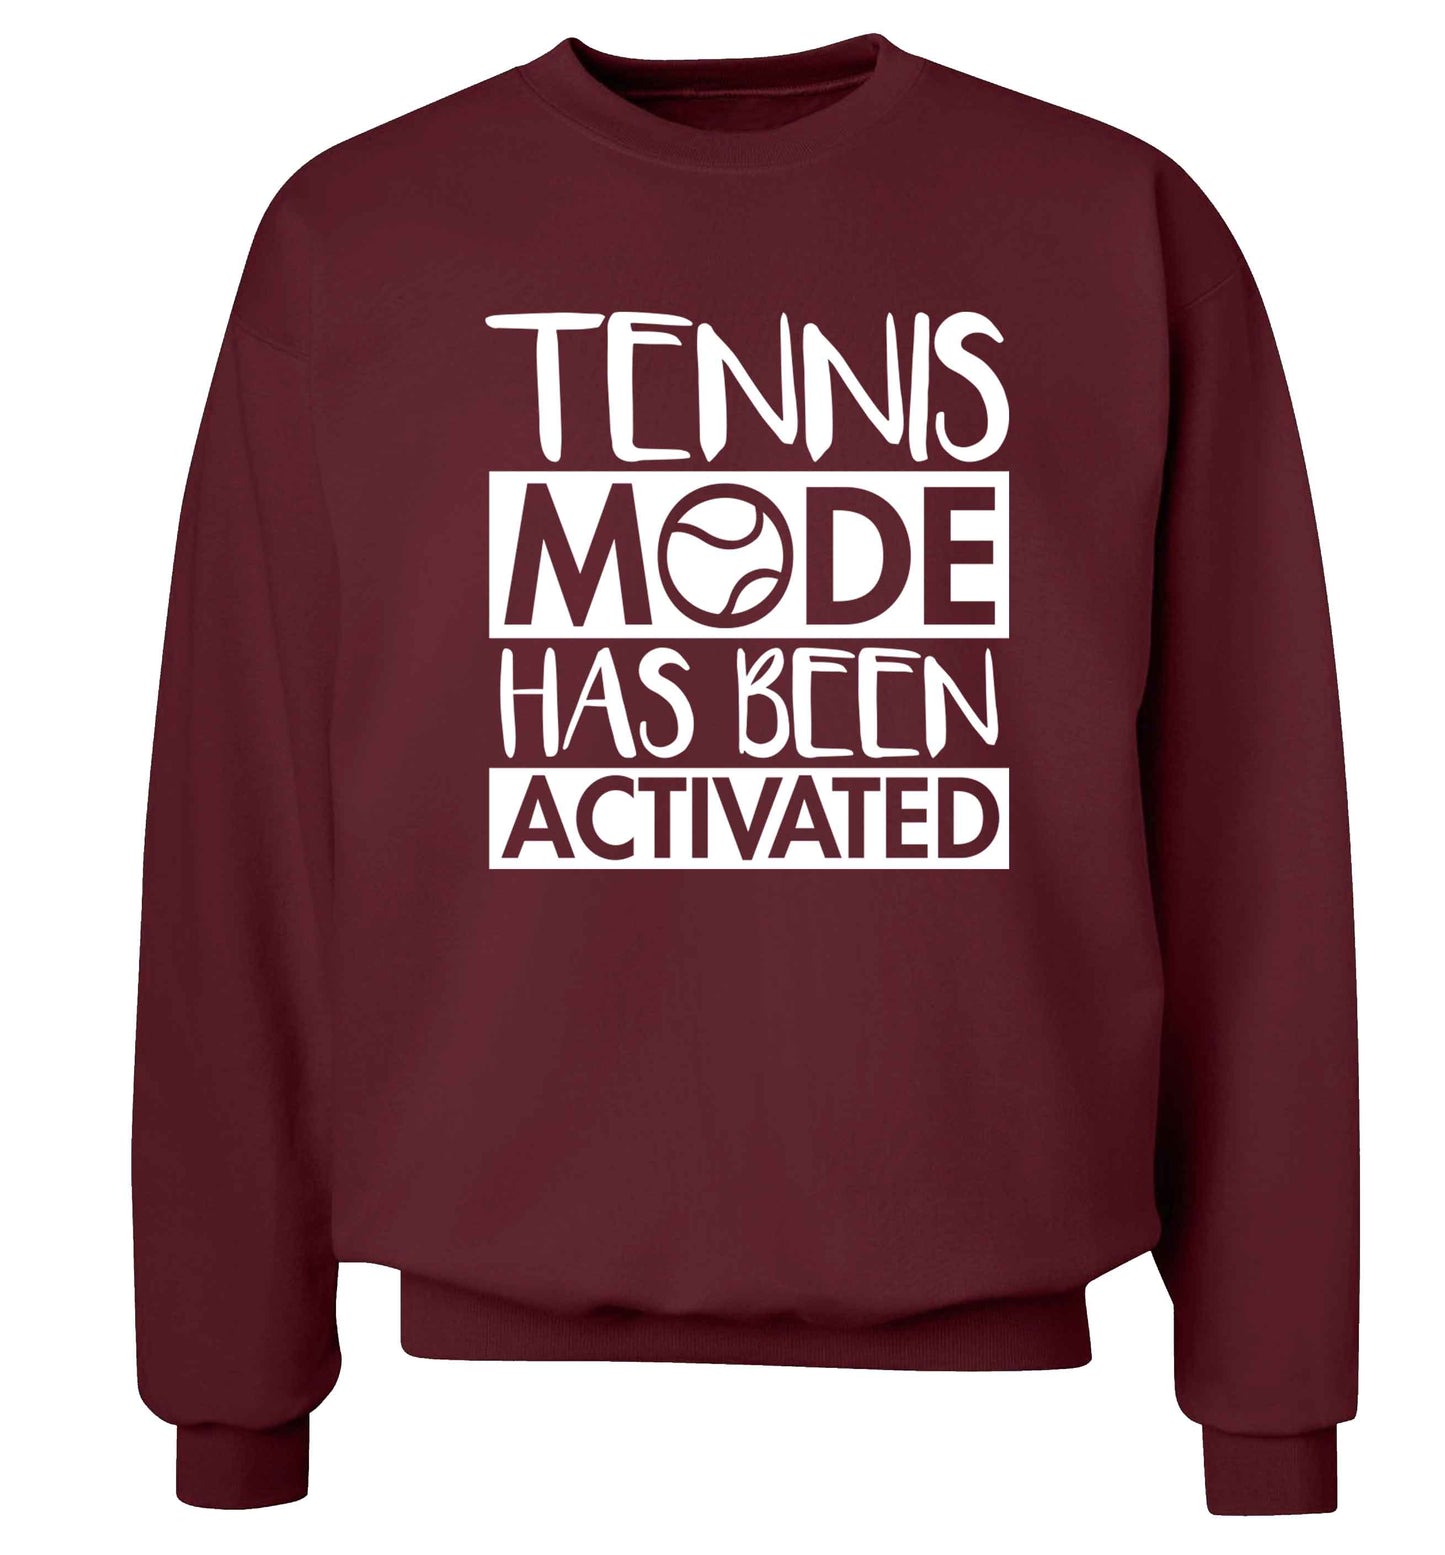 Tennis mode has been activated Adult's unisex maroon Sweater 2XL